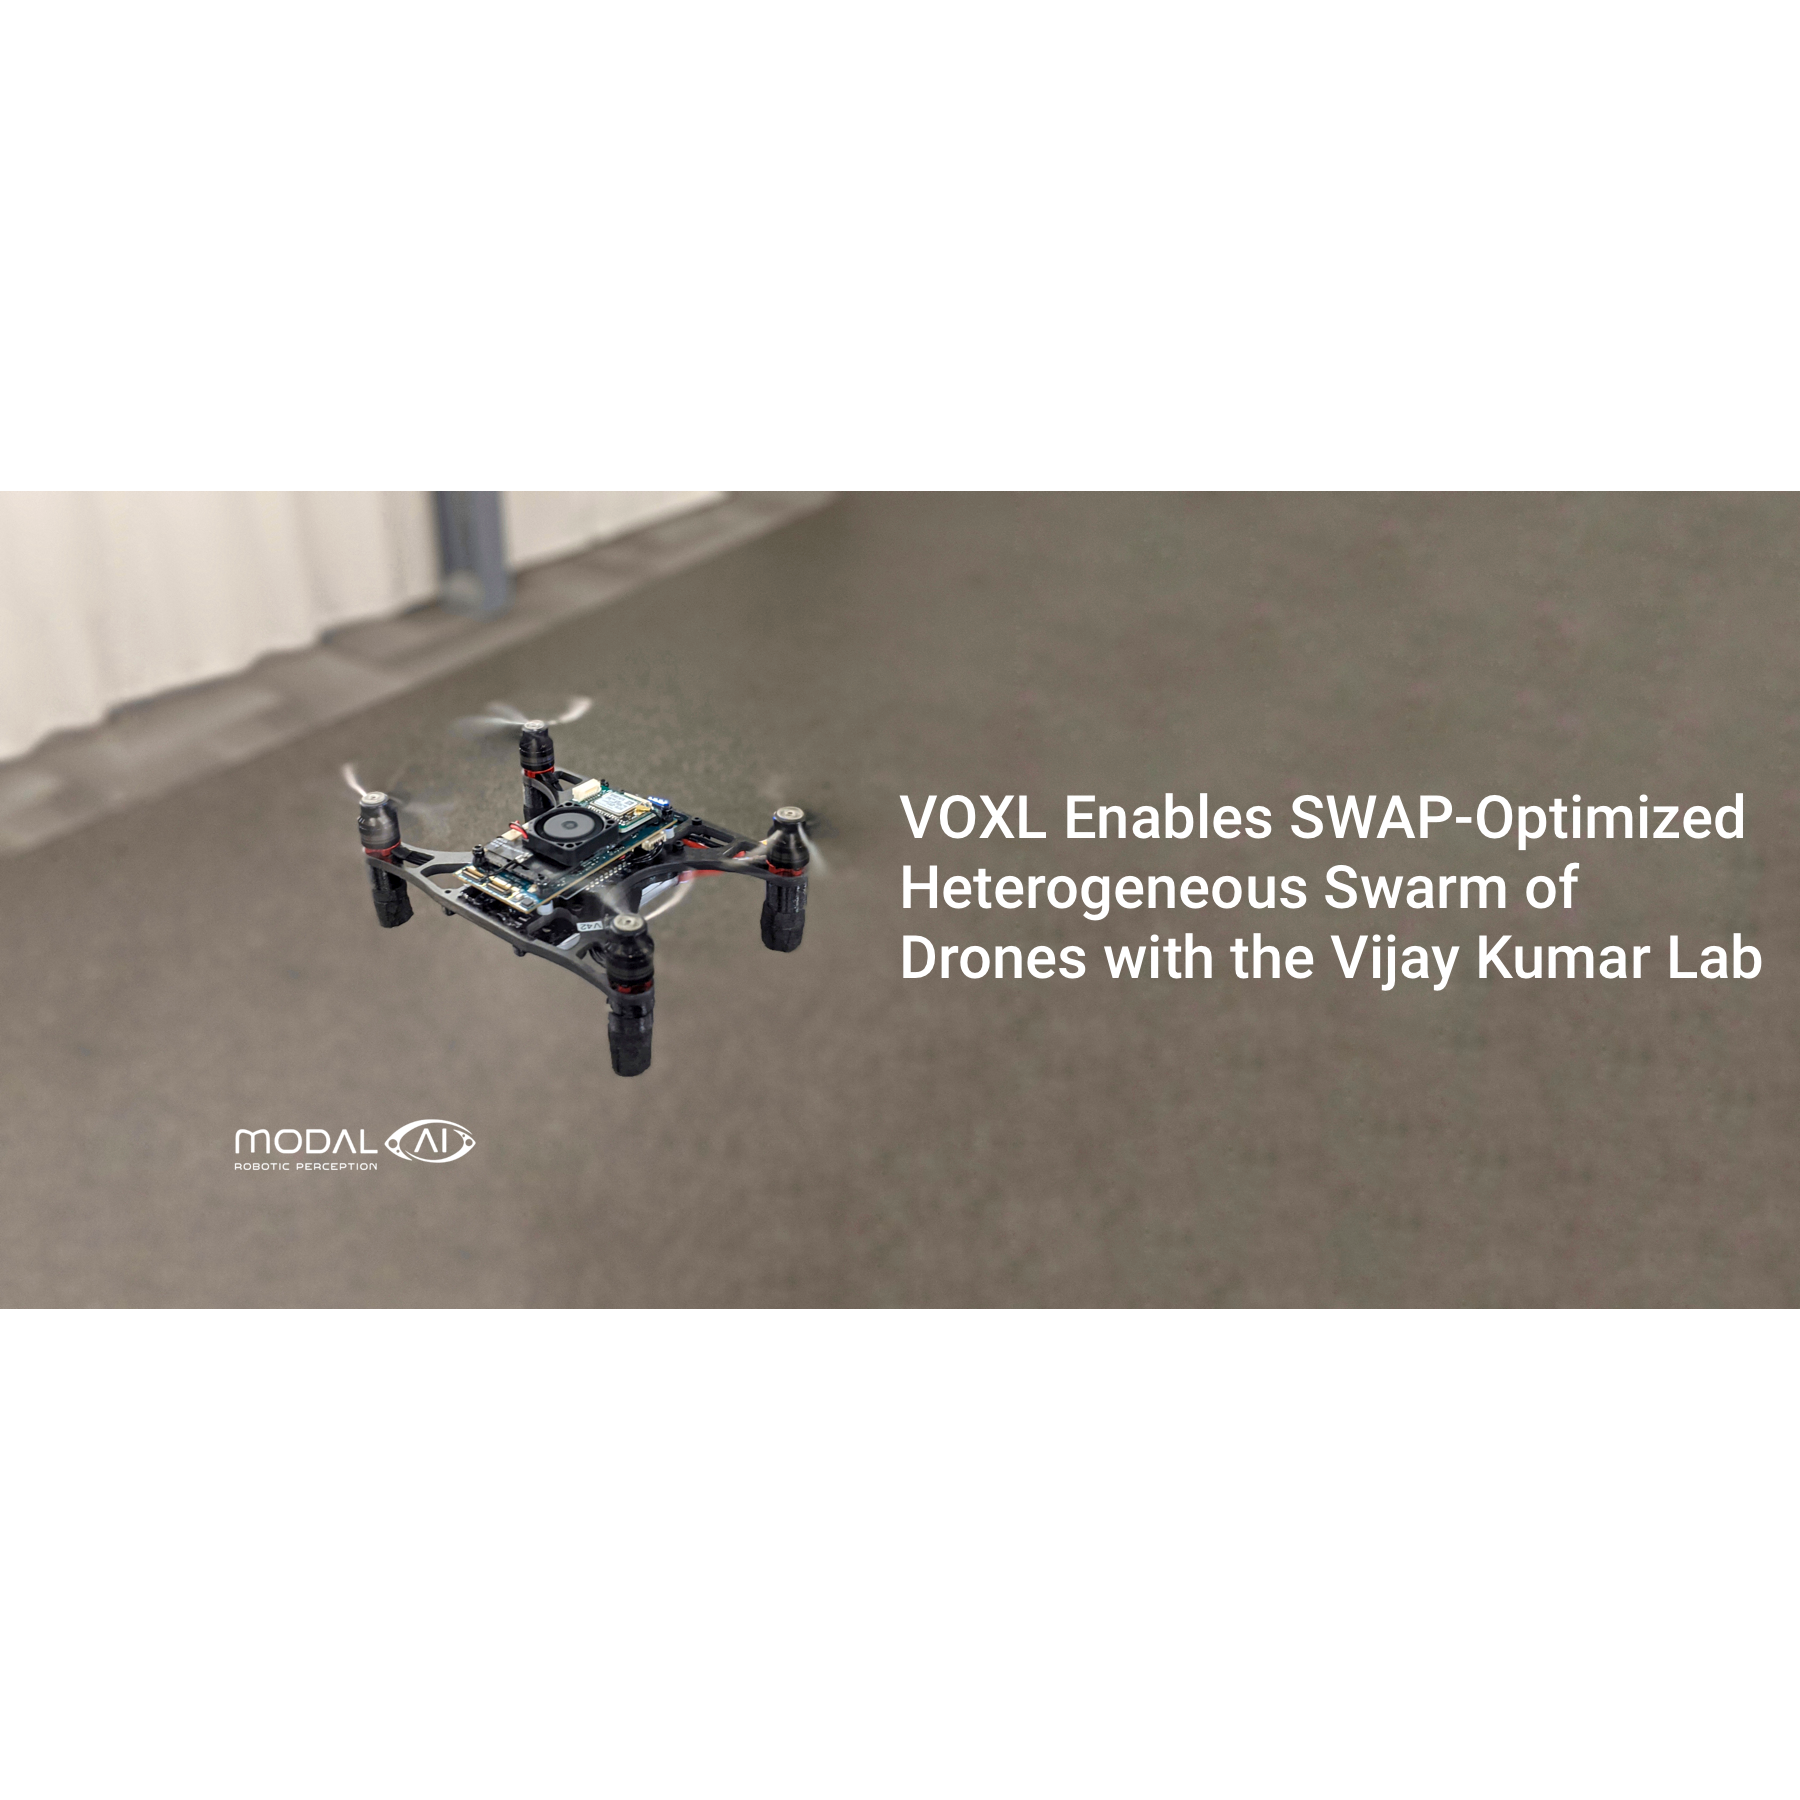 VOXL Enables SWAP-optimized heterogenous swarm of drones with the Vijay Kumar Lab